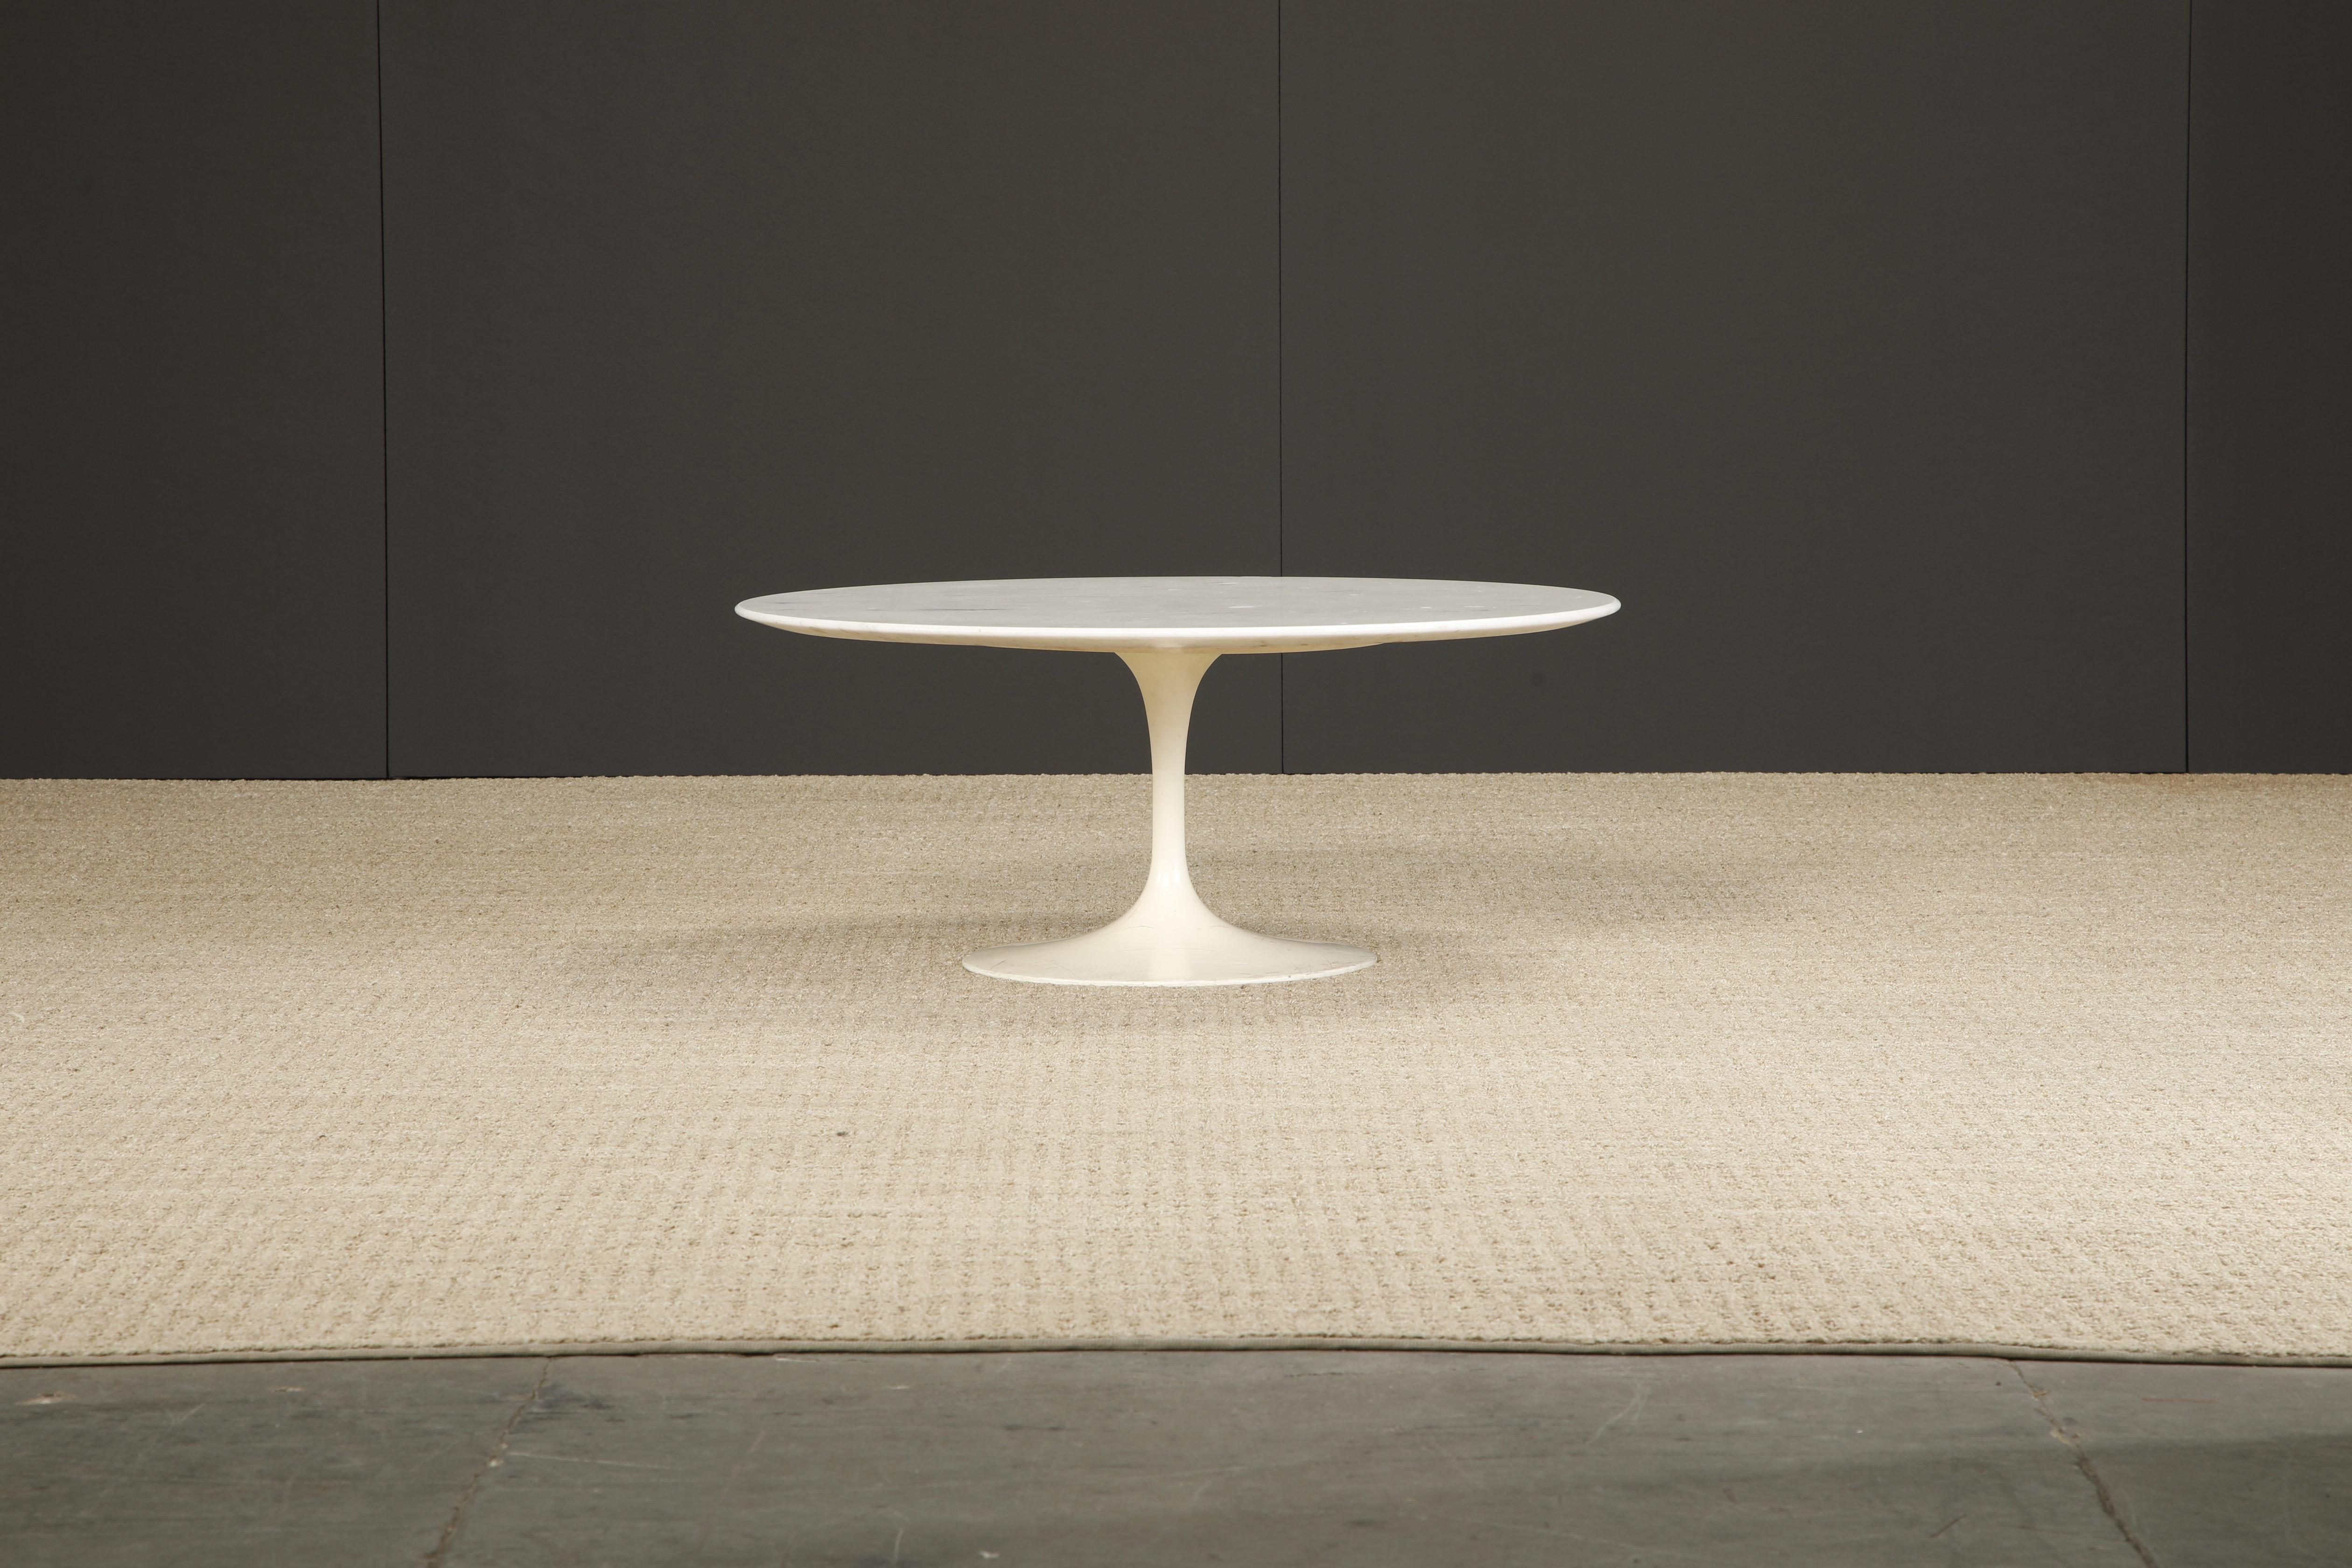 This sought-after collectors piece is an all-original early year (1st Generation) production example of the 'Tulip' coffee table designed in 1956 by Eero Saarinen for Knoll Associates features a 36